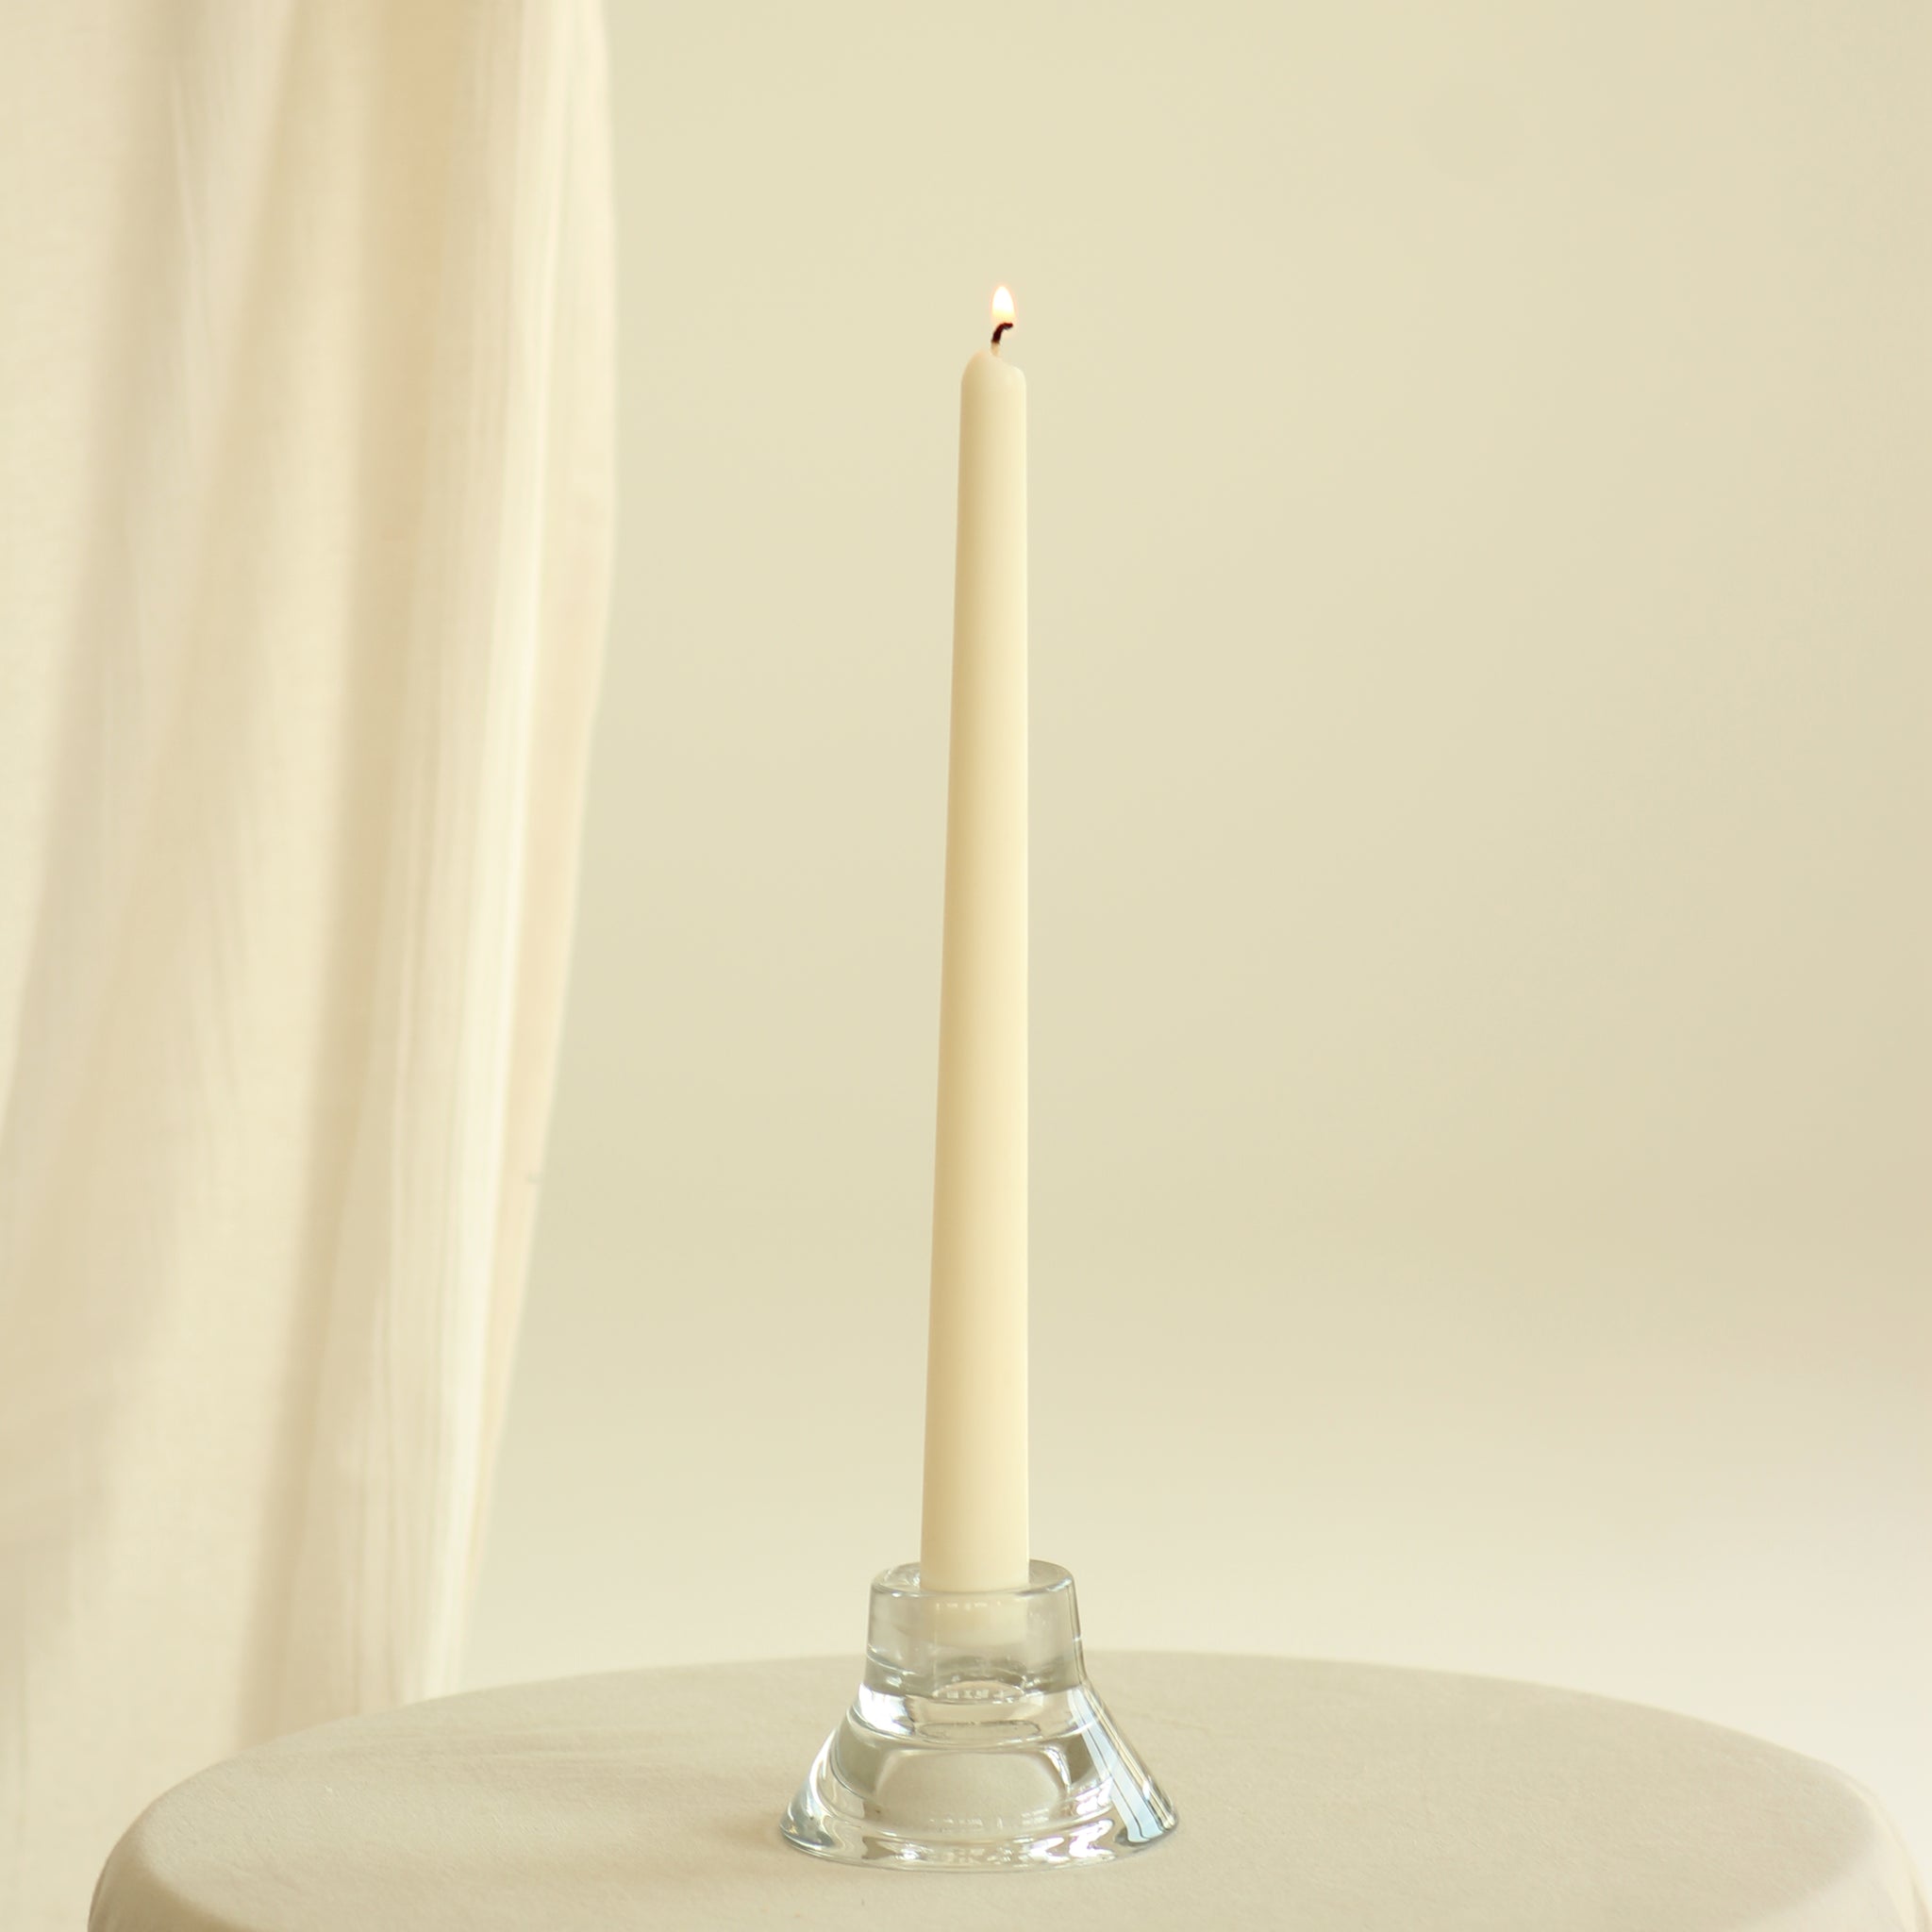 TALL CANDLES (2 pieces)